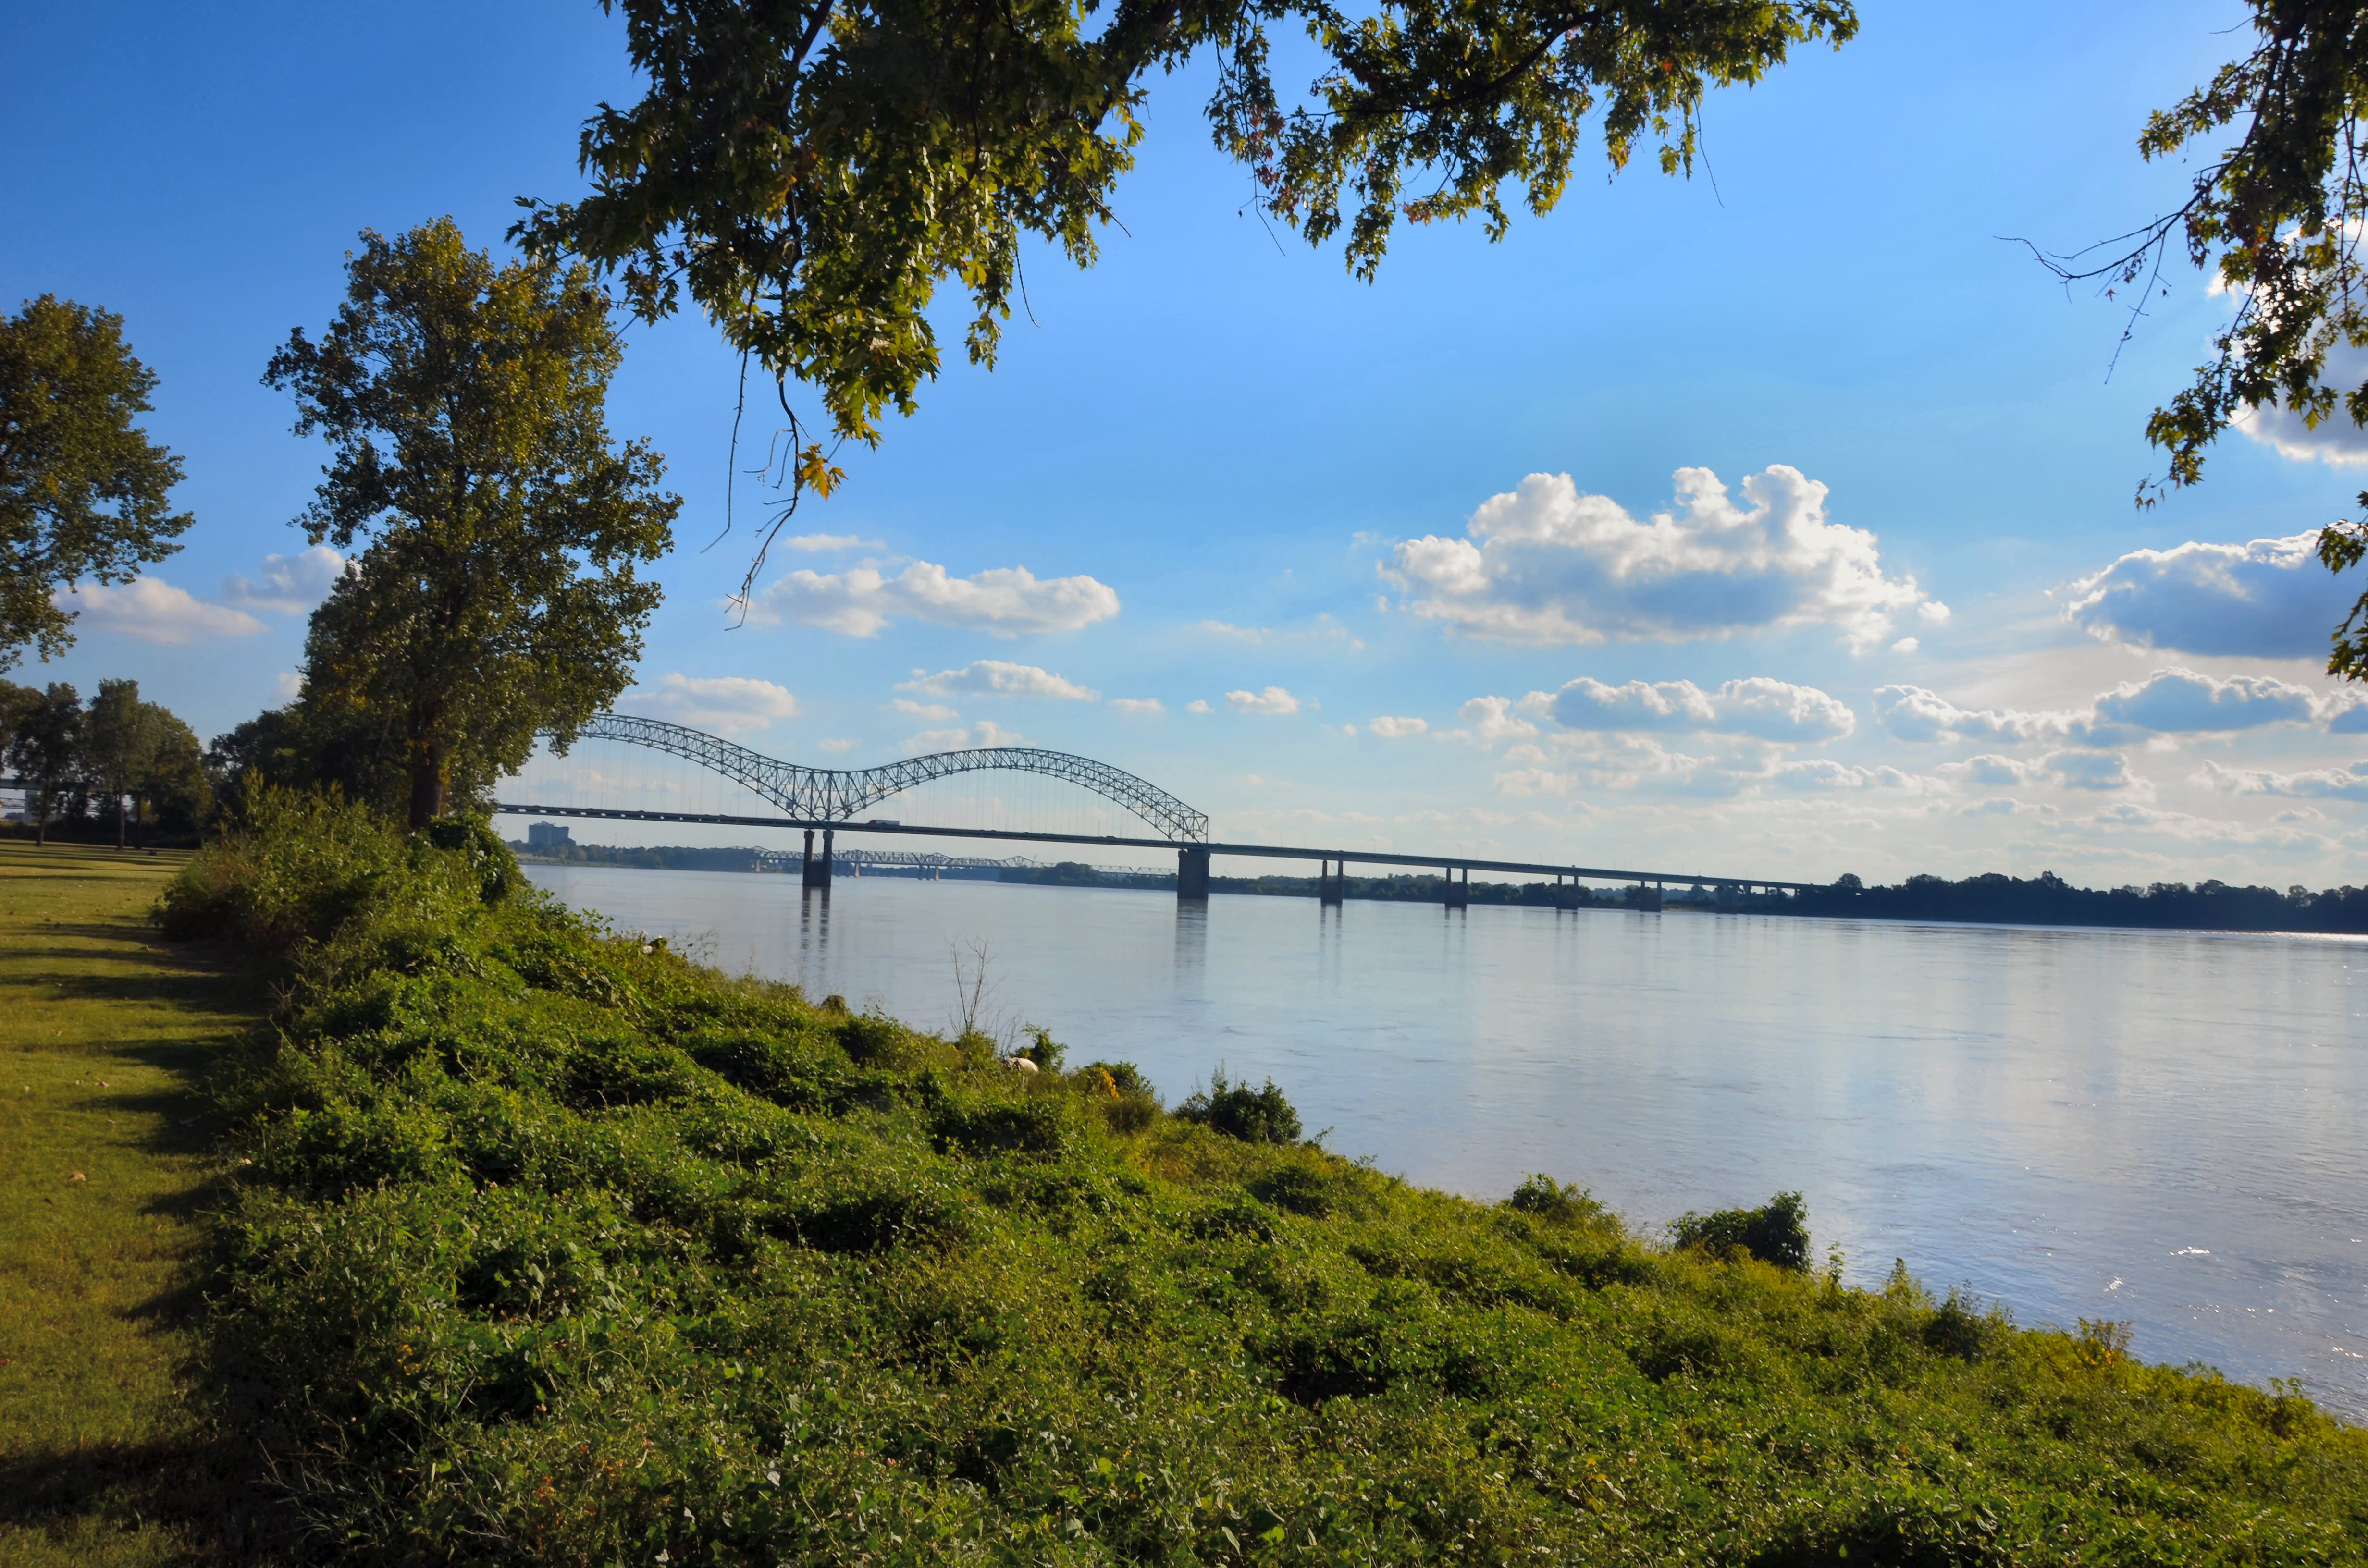 tour of the mississippi river valley